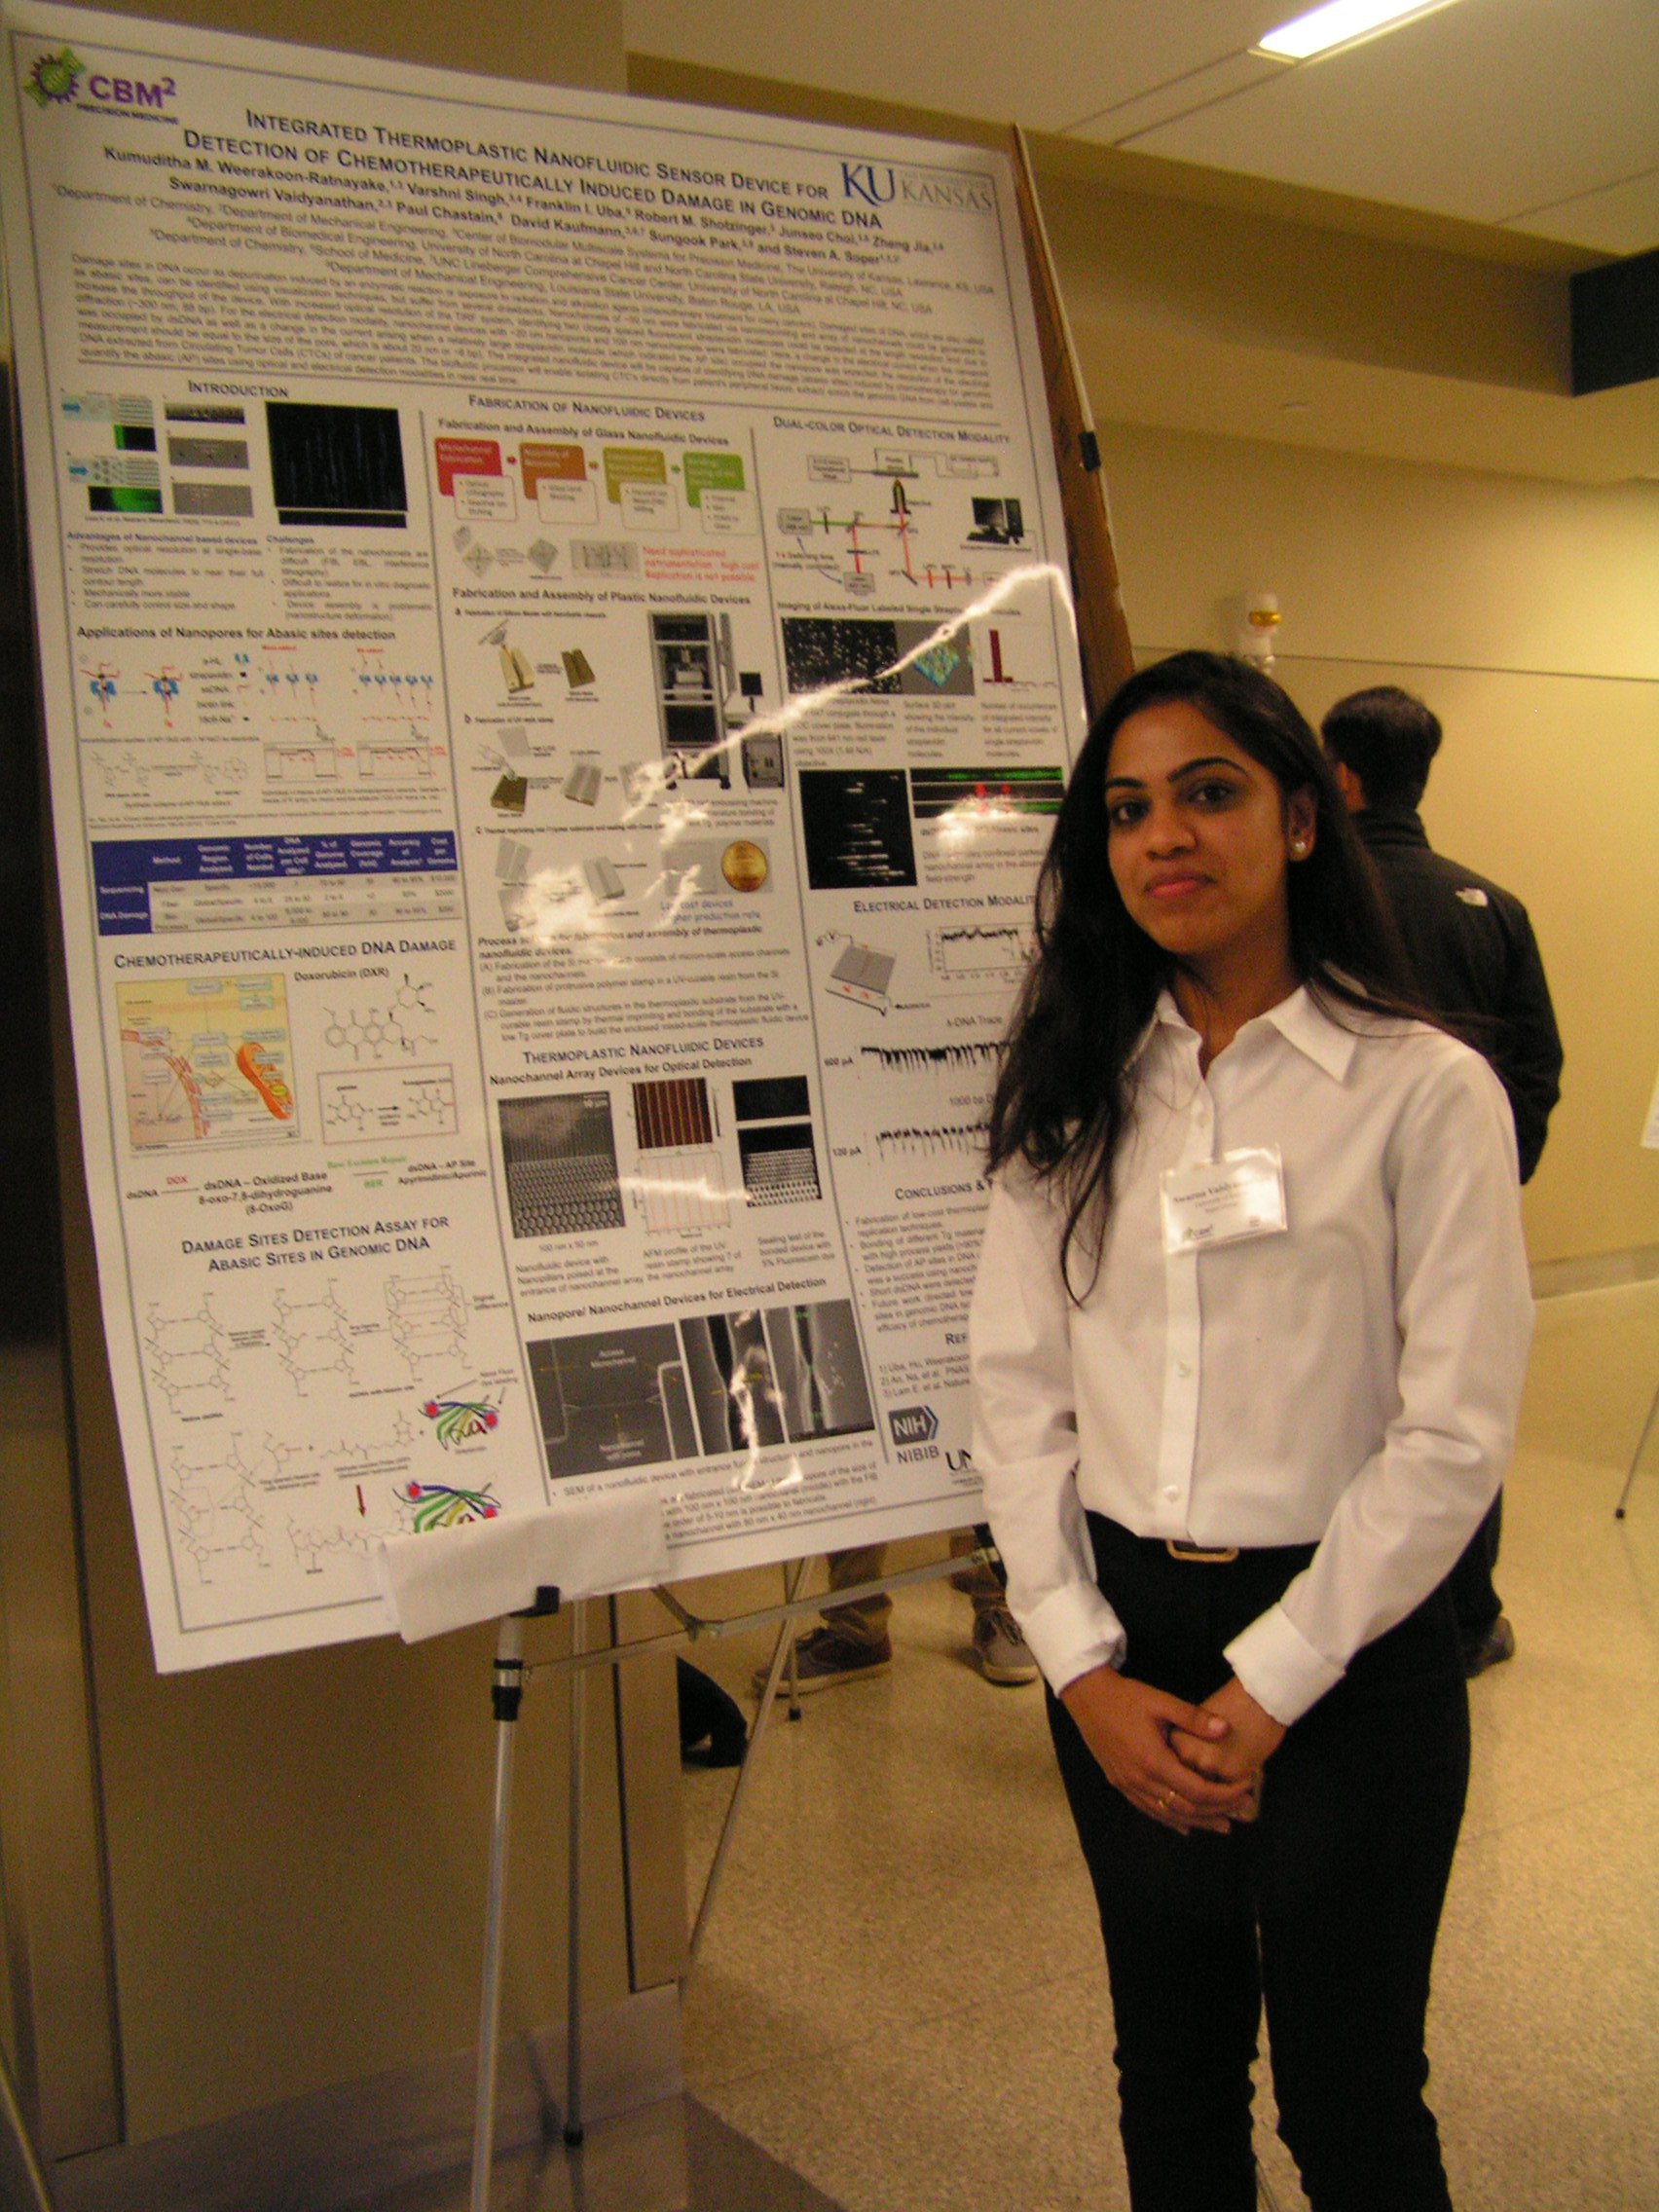 One student standing adjacent to their own research poster.